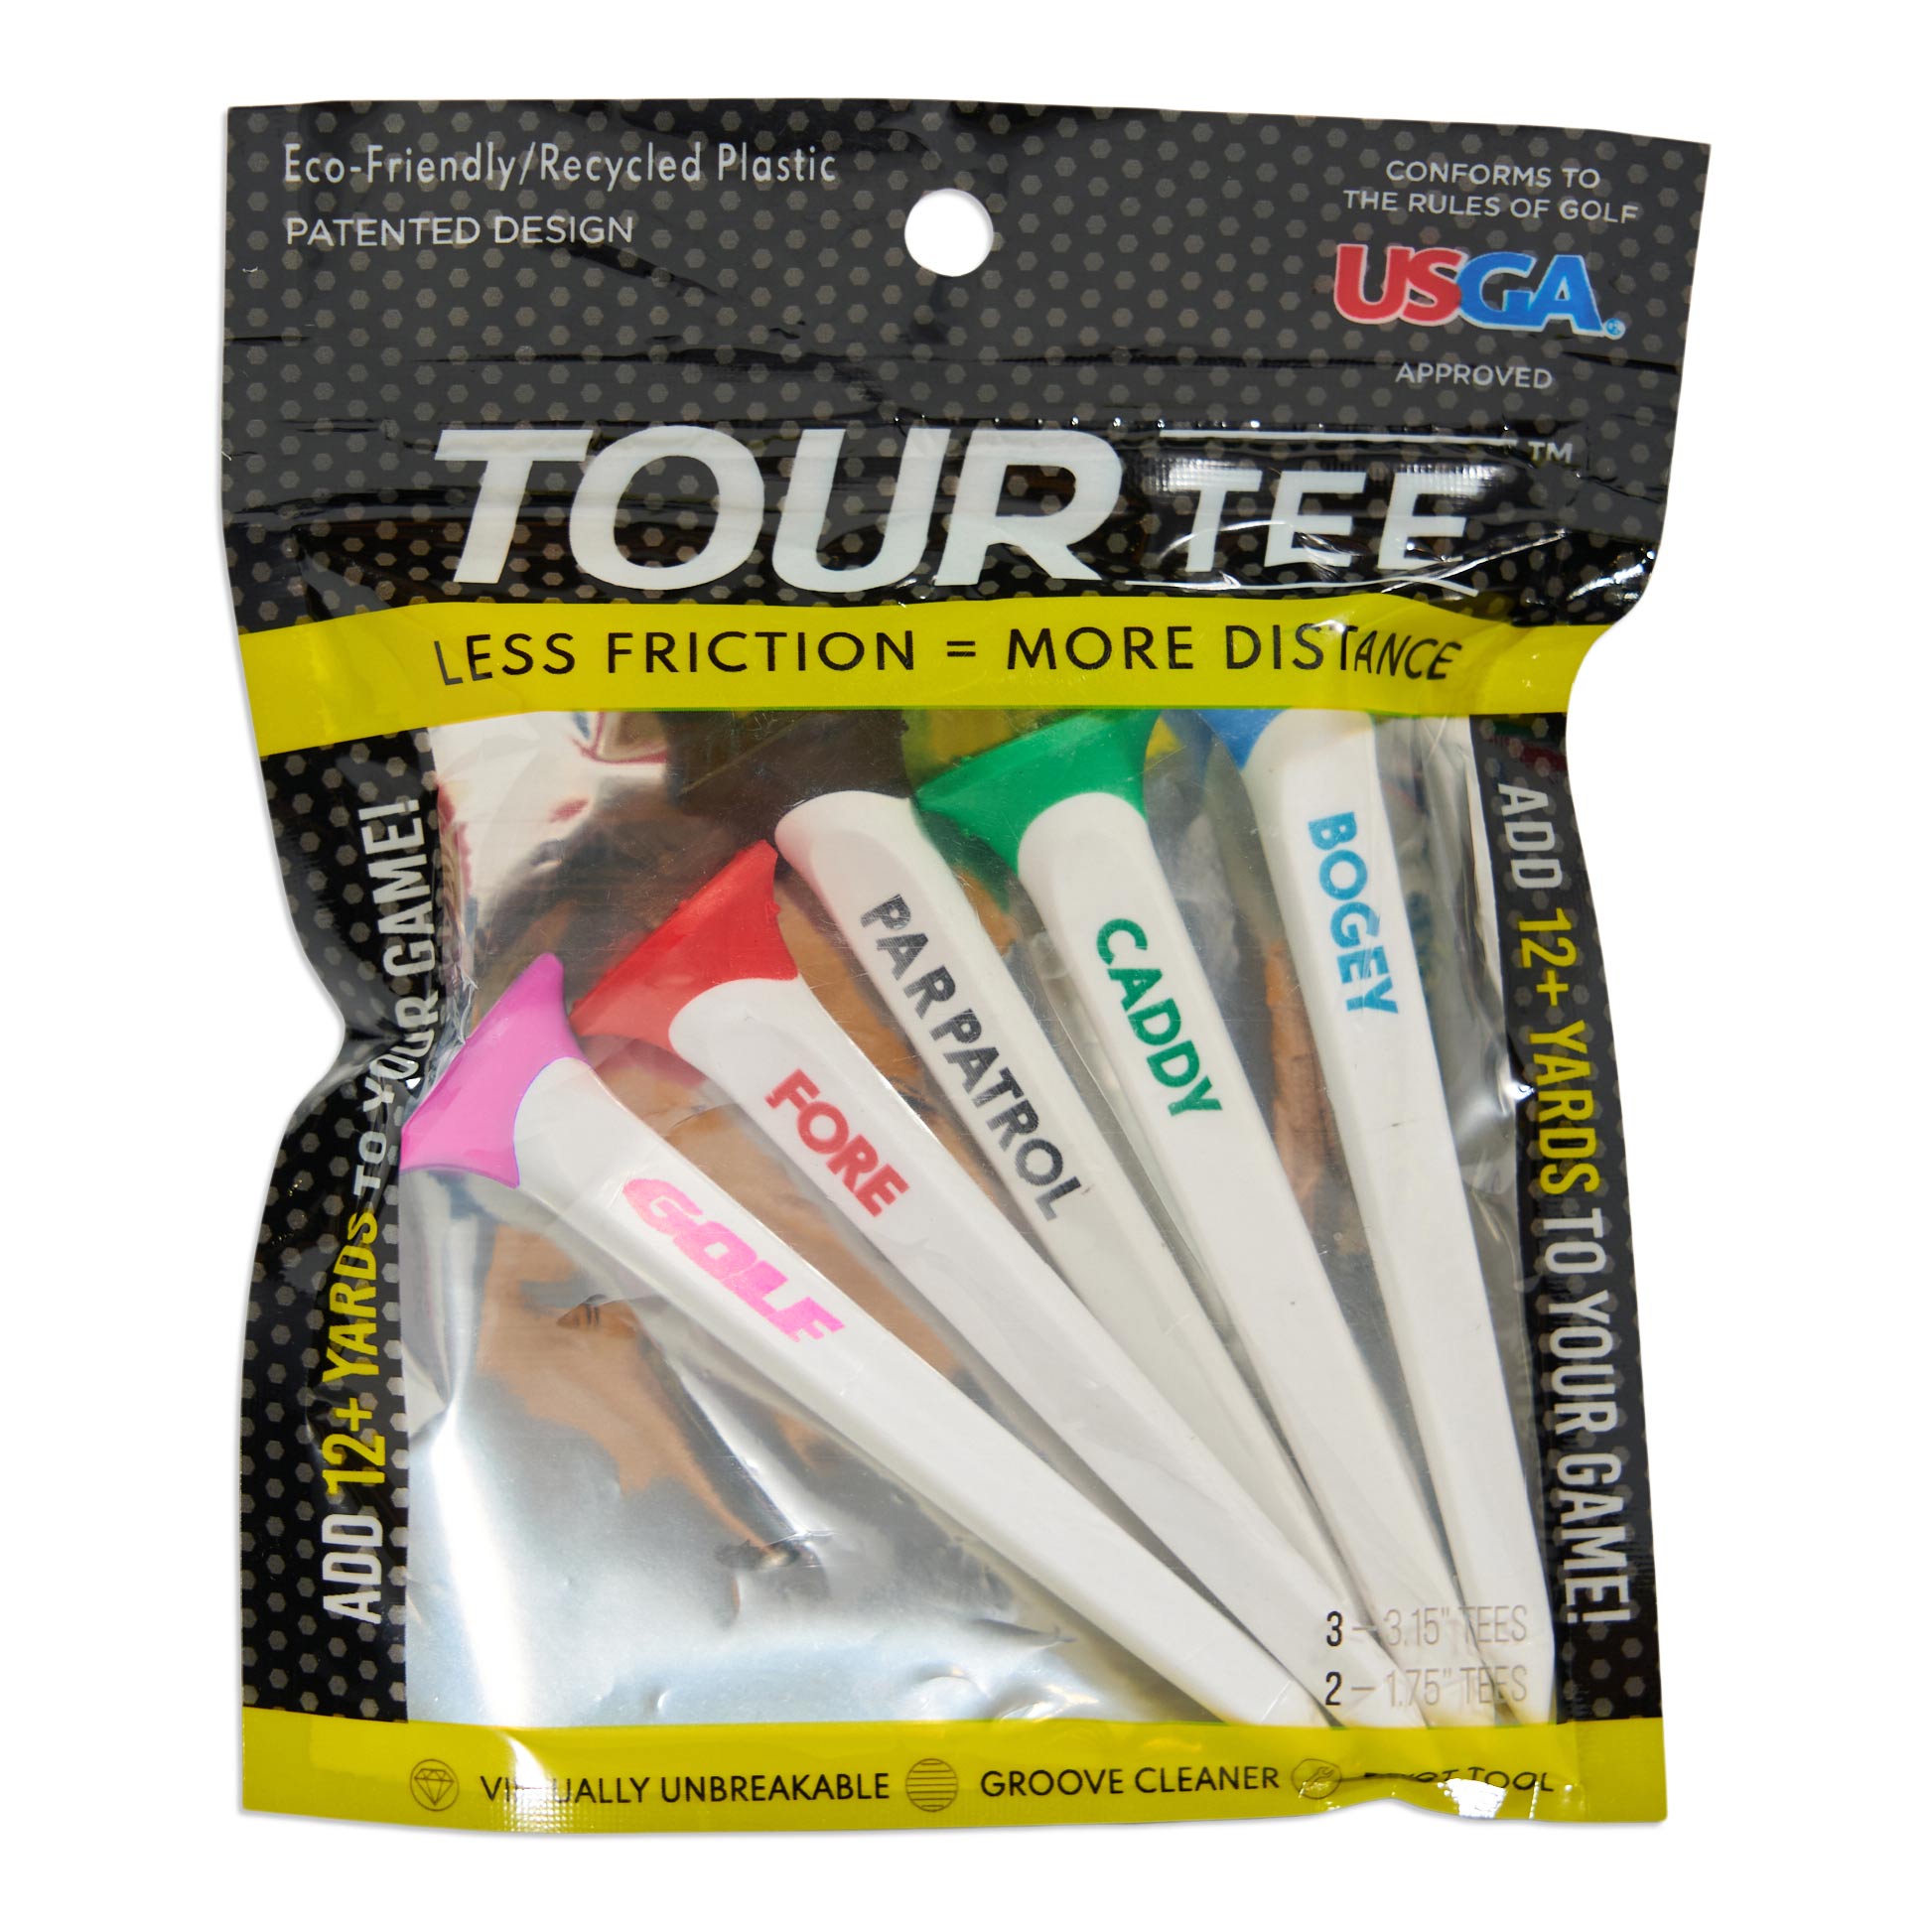 Enhance your golf game with Birds of Condor & Tour Tee's eco-friendly, USGA-compliant tees. Less friction, more distance, and stamped for fun. Grab a pack of 5 with 80mm rockets for powerful drives!